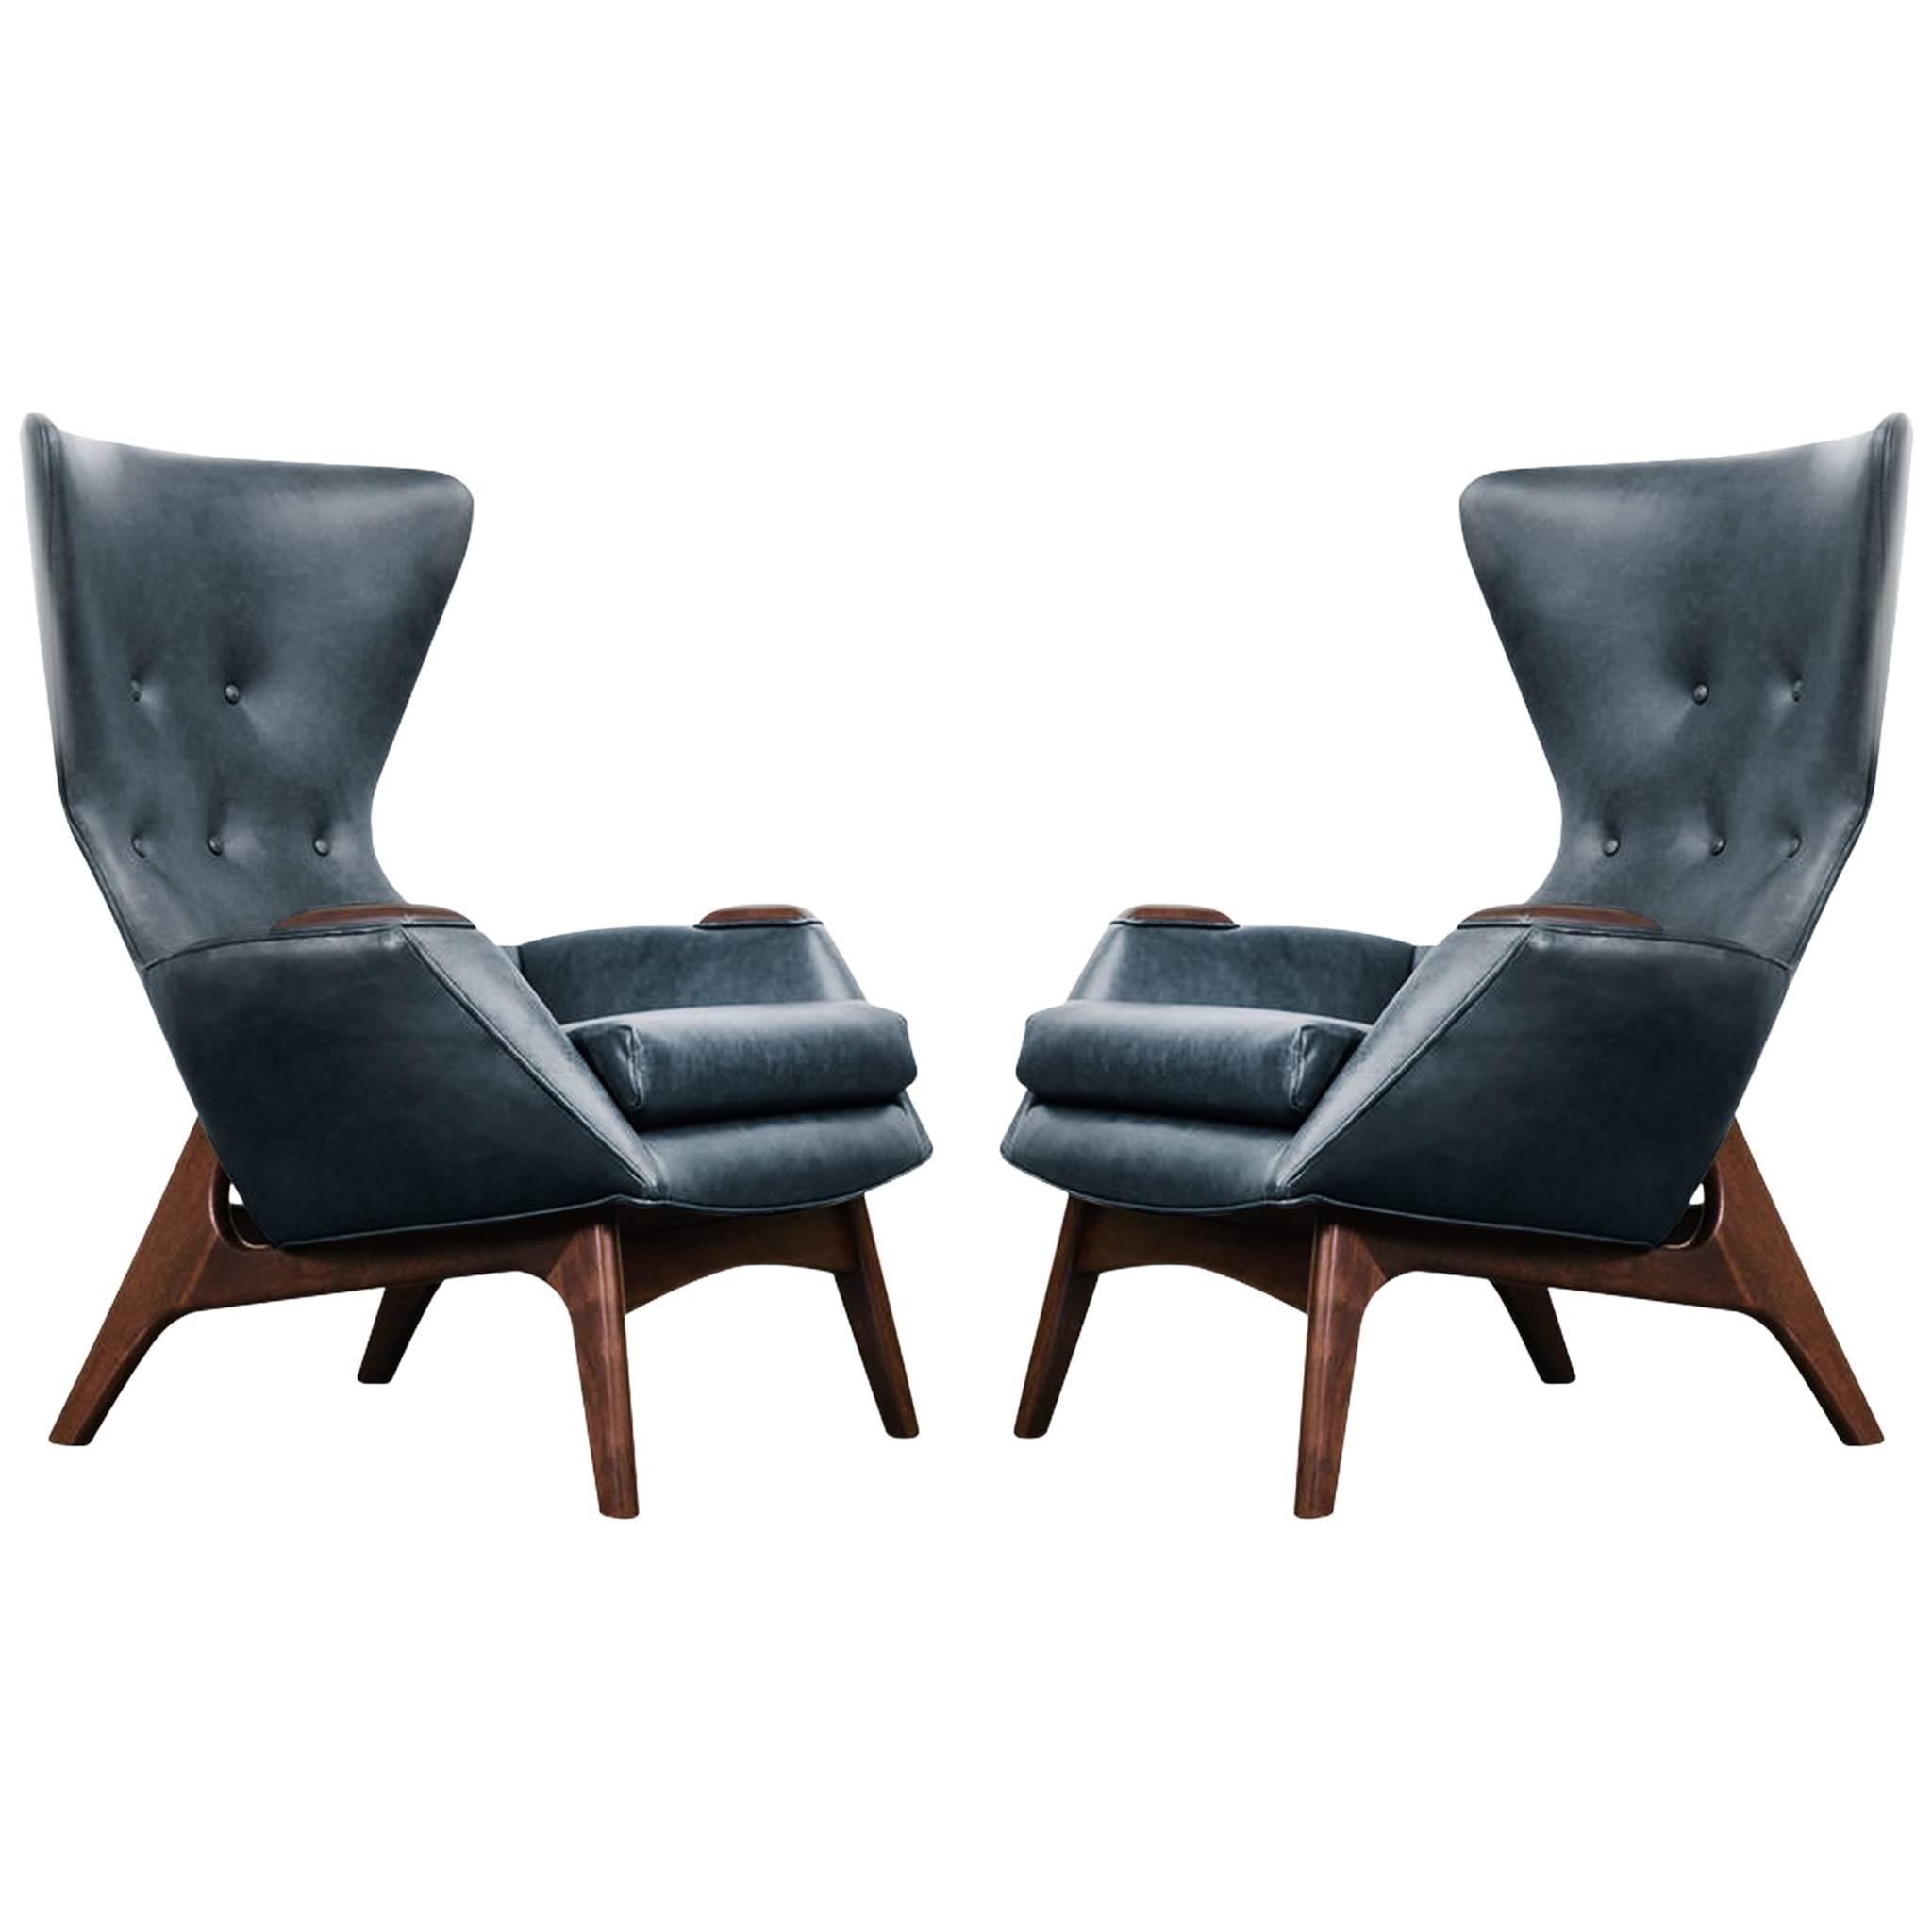 Adrian Pearsall for Craft Associates Wingback Chairs, Model 2231-C